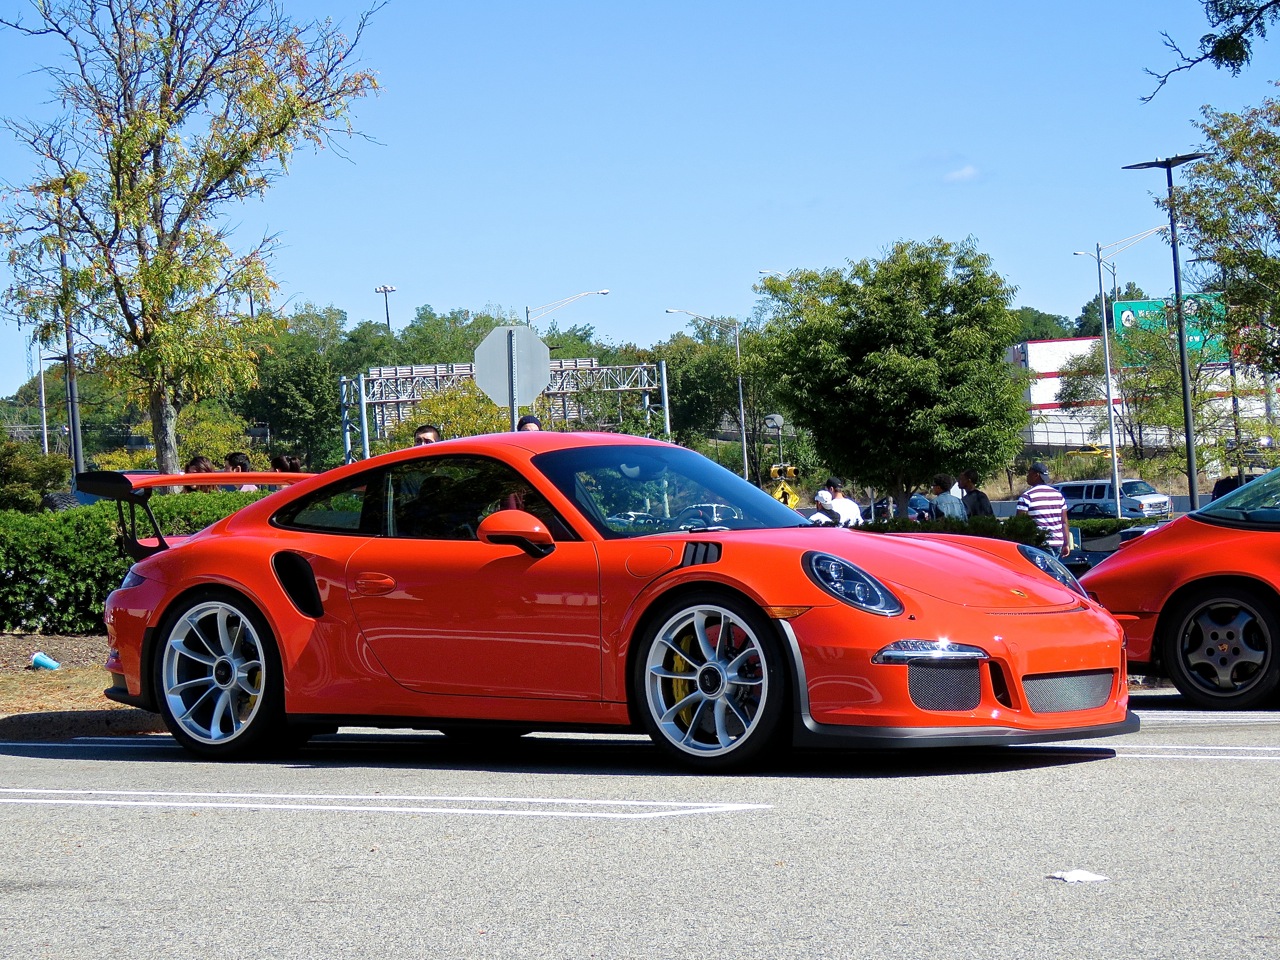 Porsche 991 GT3 RS at Cars and Caffe